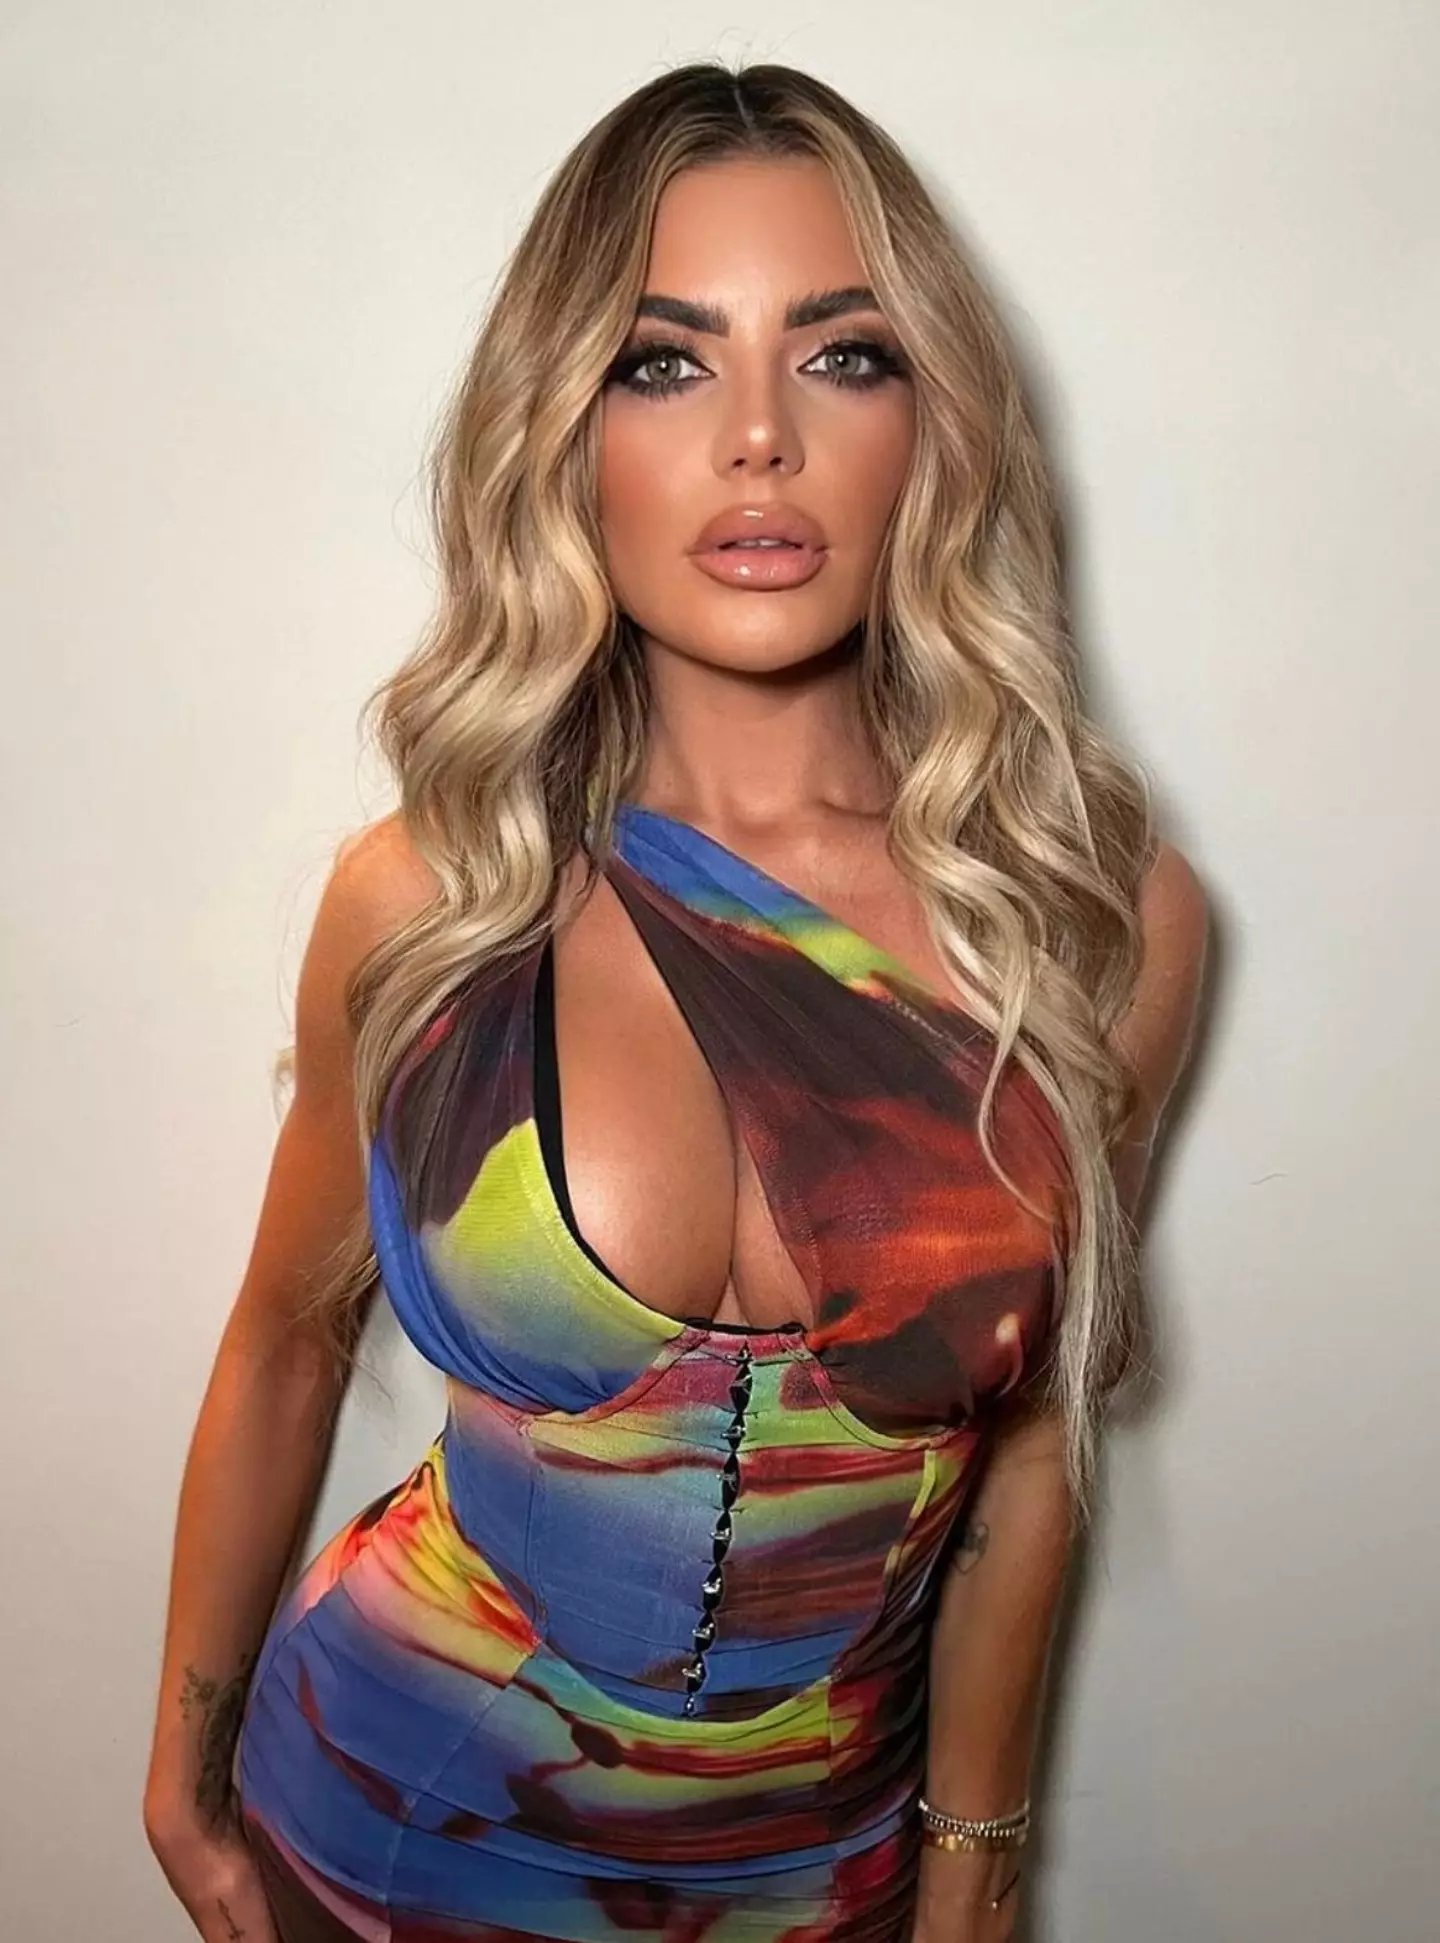 The former Love Island star joined the adult platform in 2020.